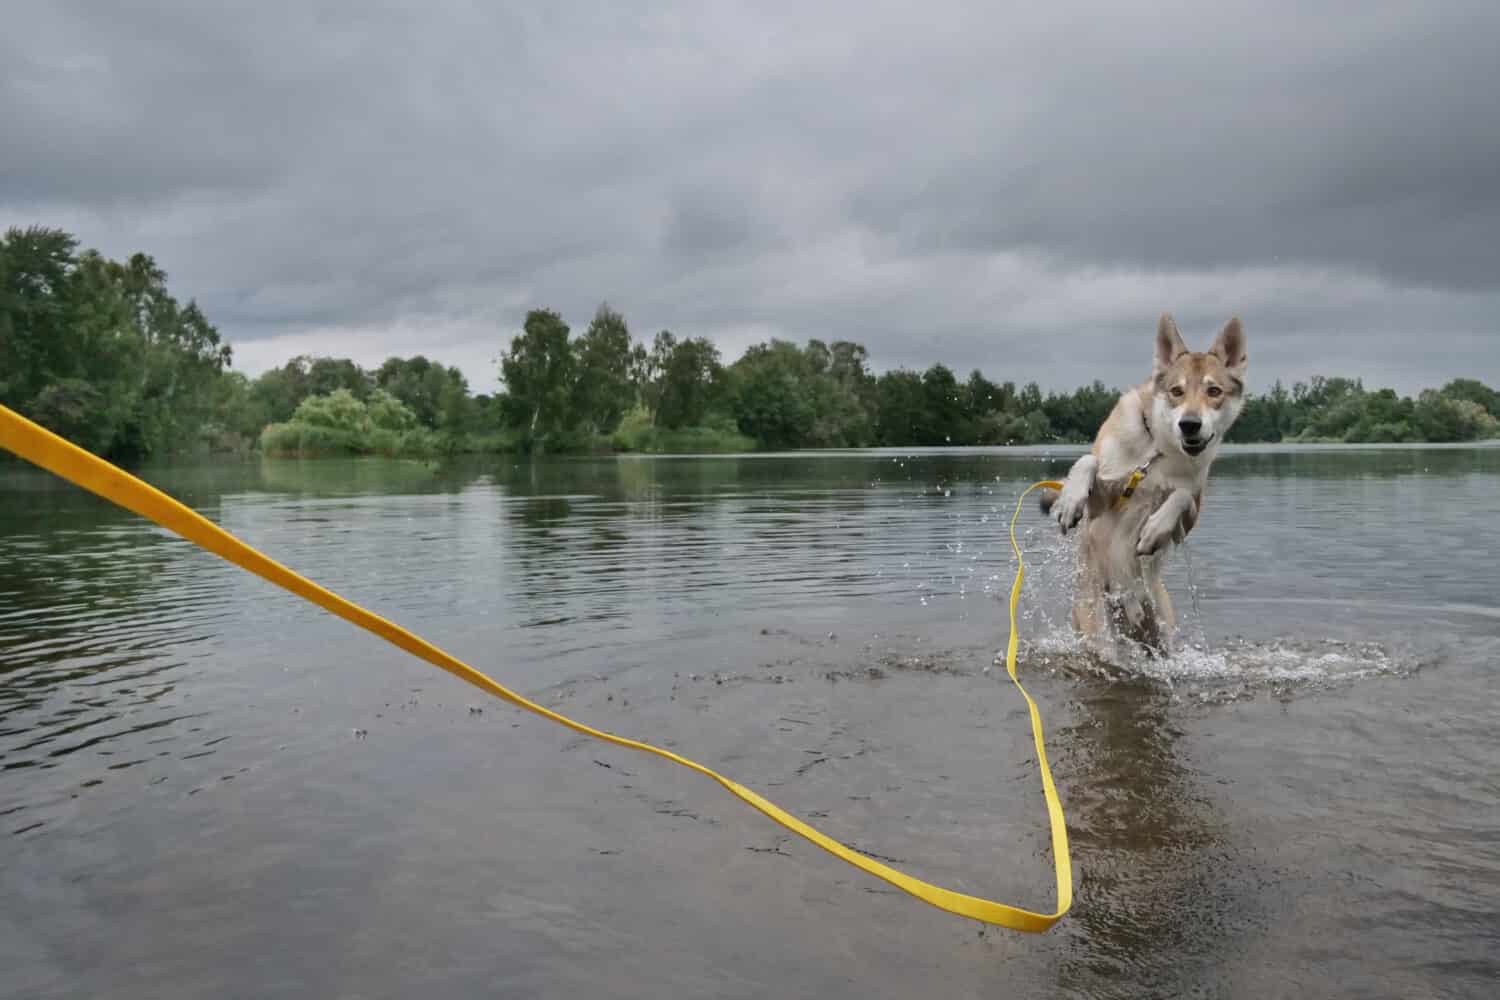 czech wolfdog with a long dog leash is jumping in the water of a lake